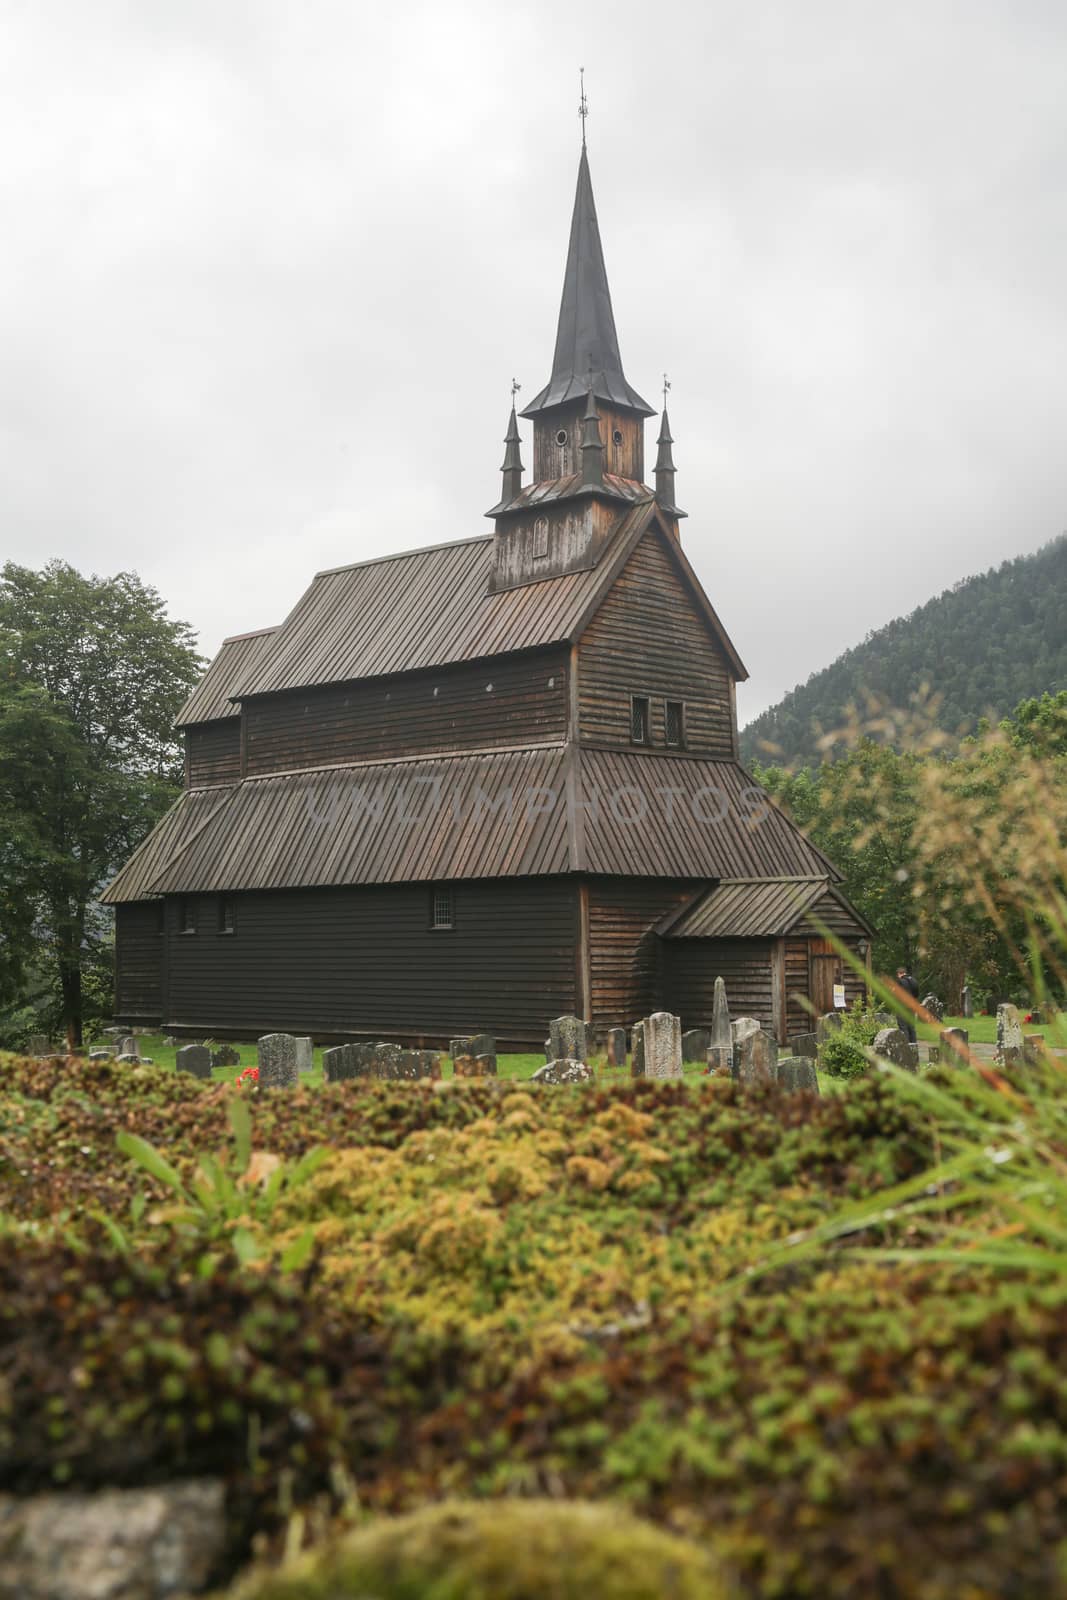 The Kaupanger Stave Church is the largest stave church in Sogn og Fjordane, Norway